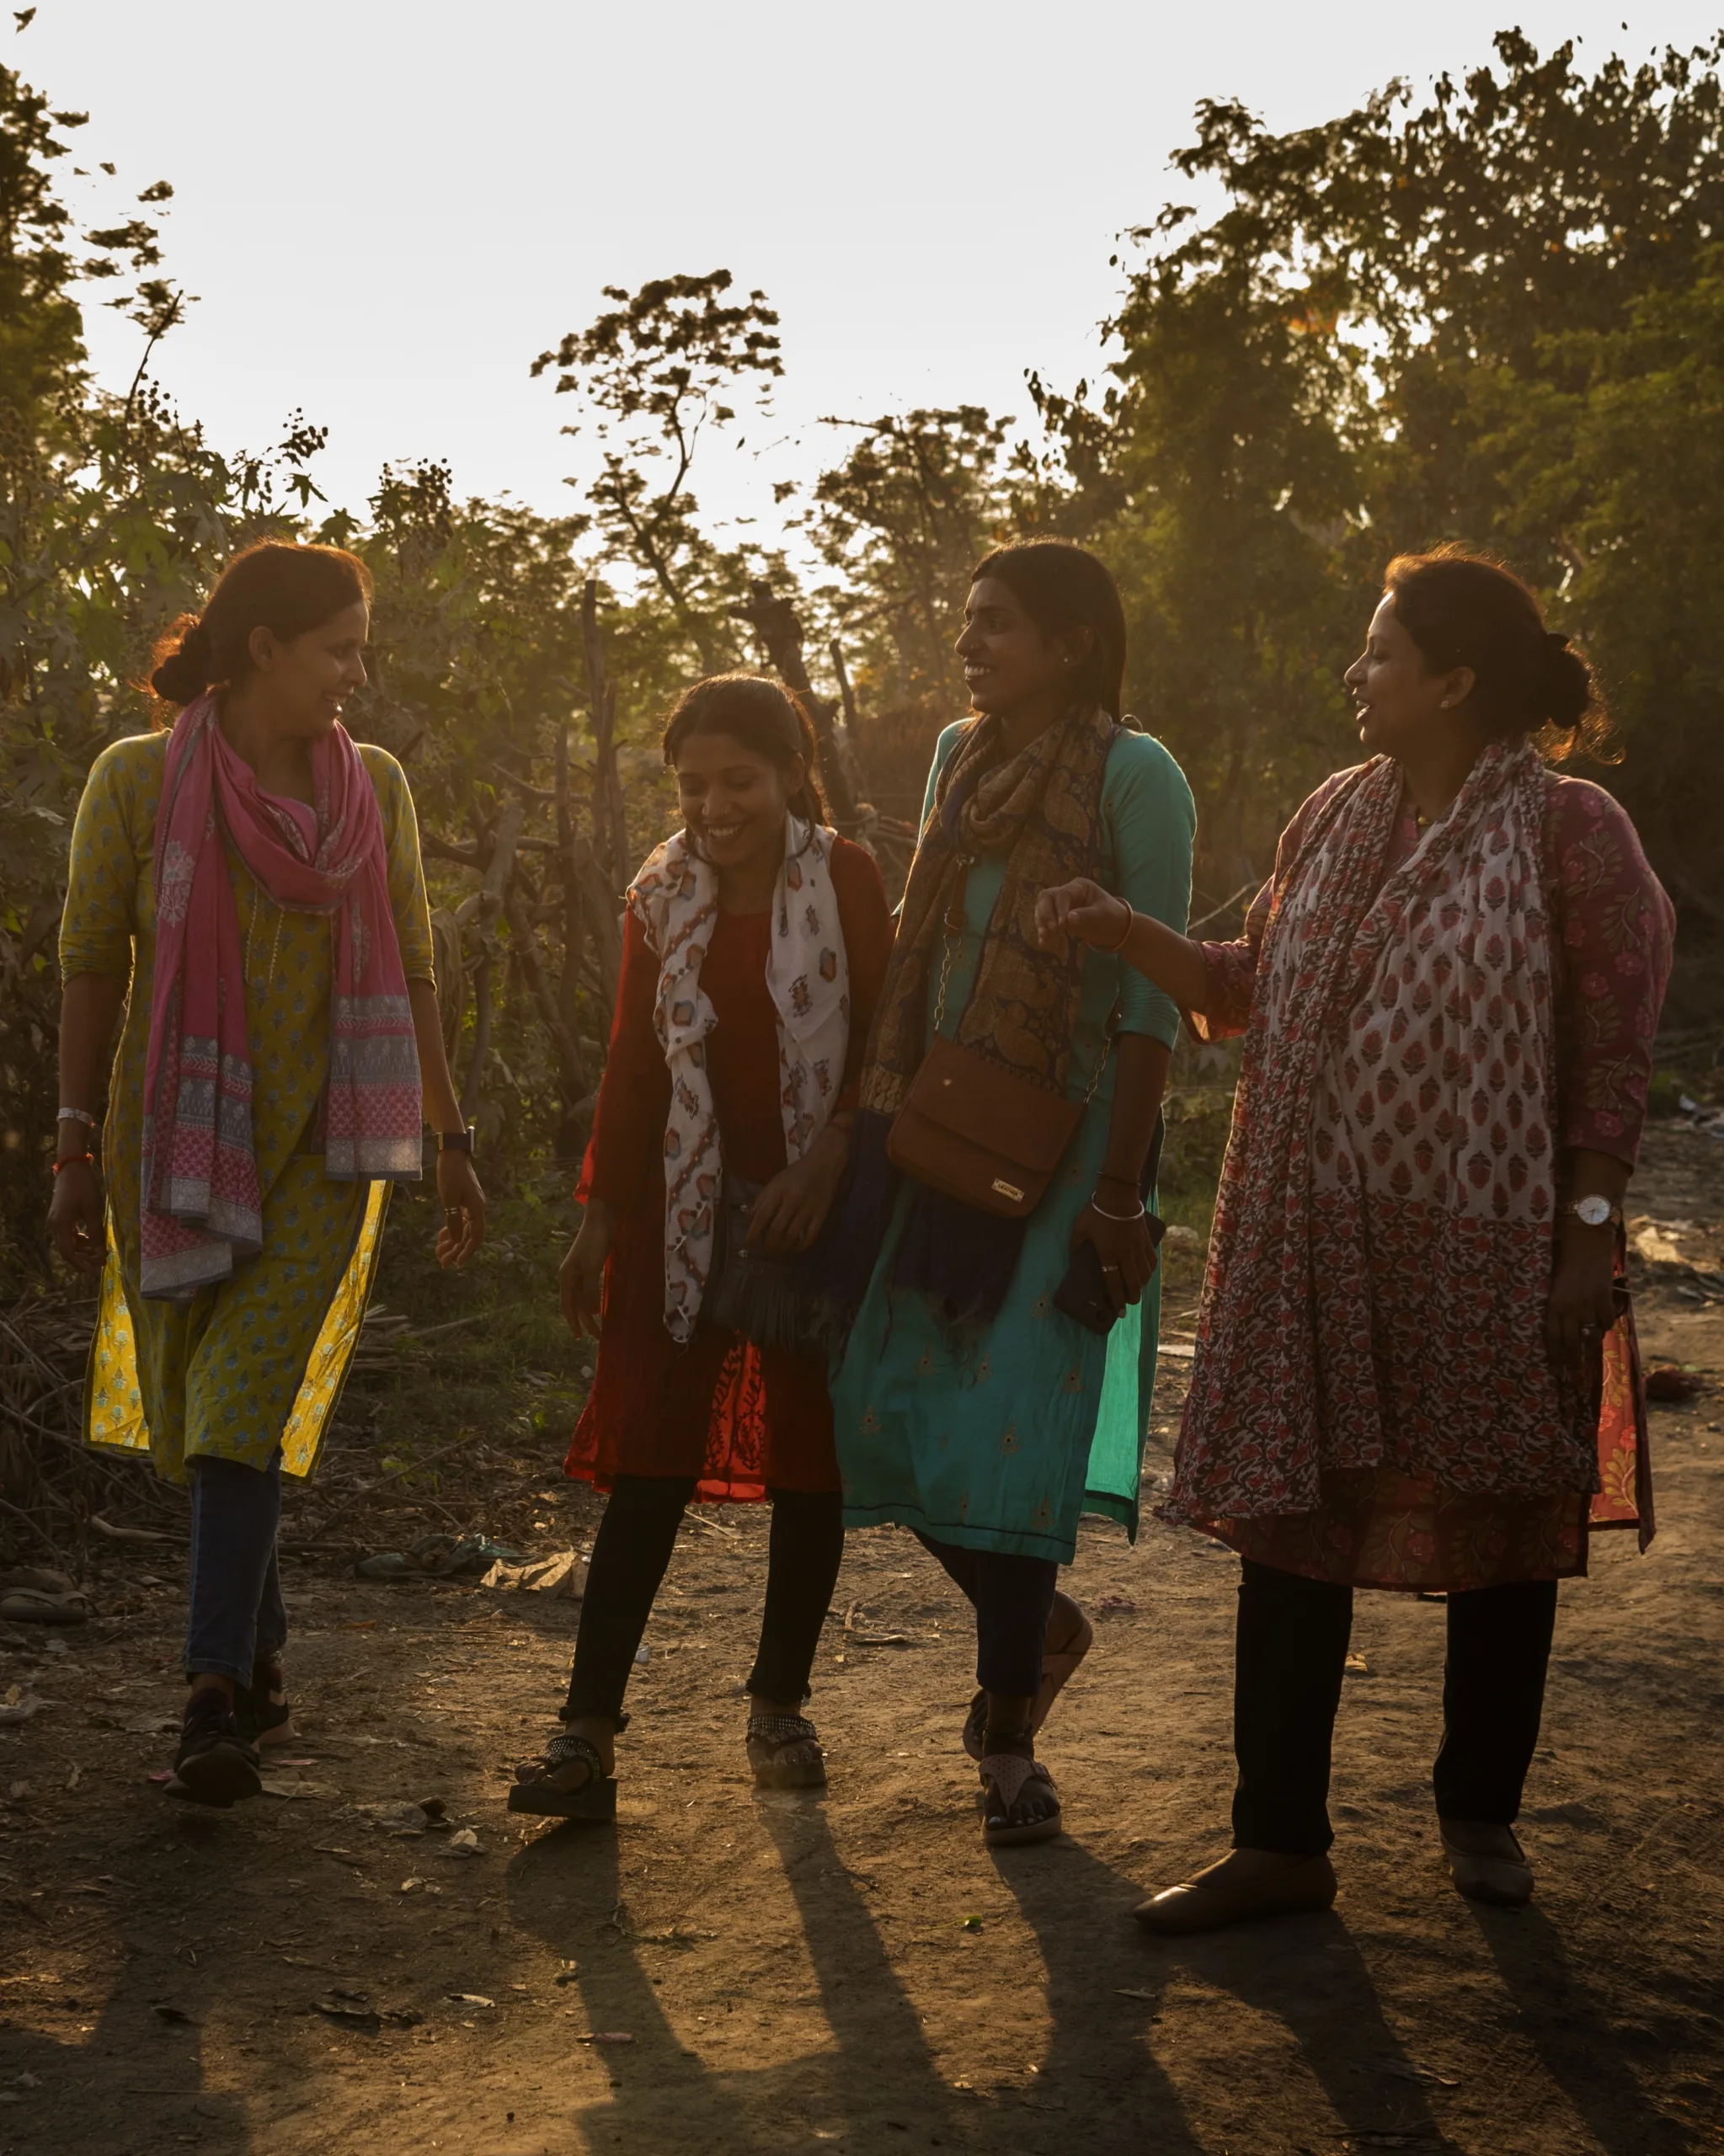 A group of women walk together outside talking and smiling.